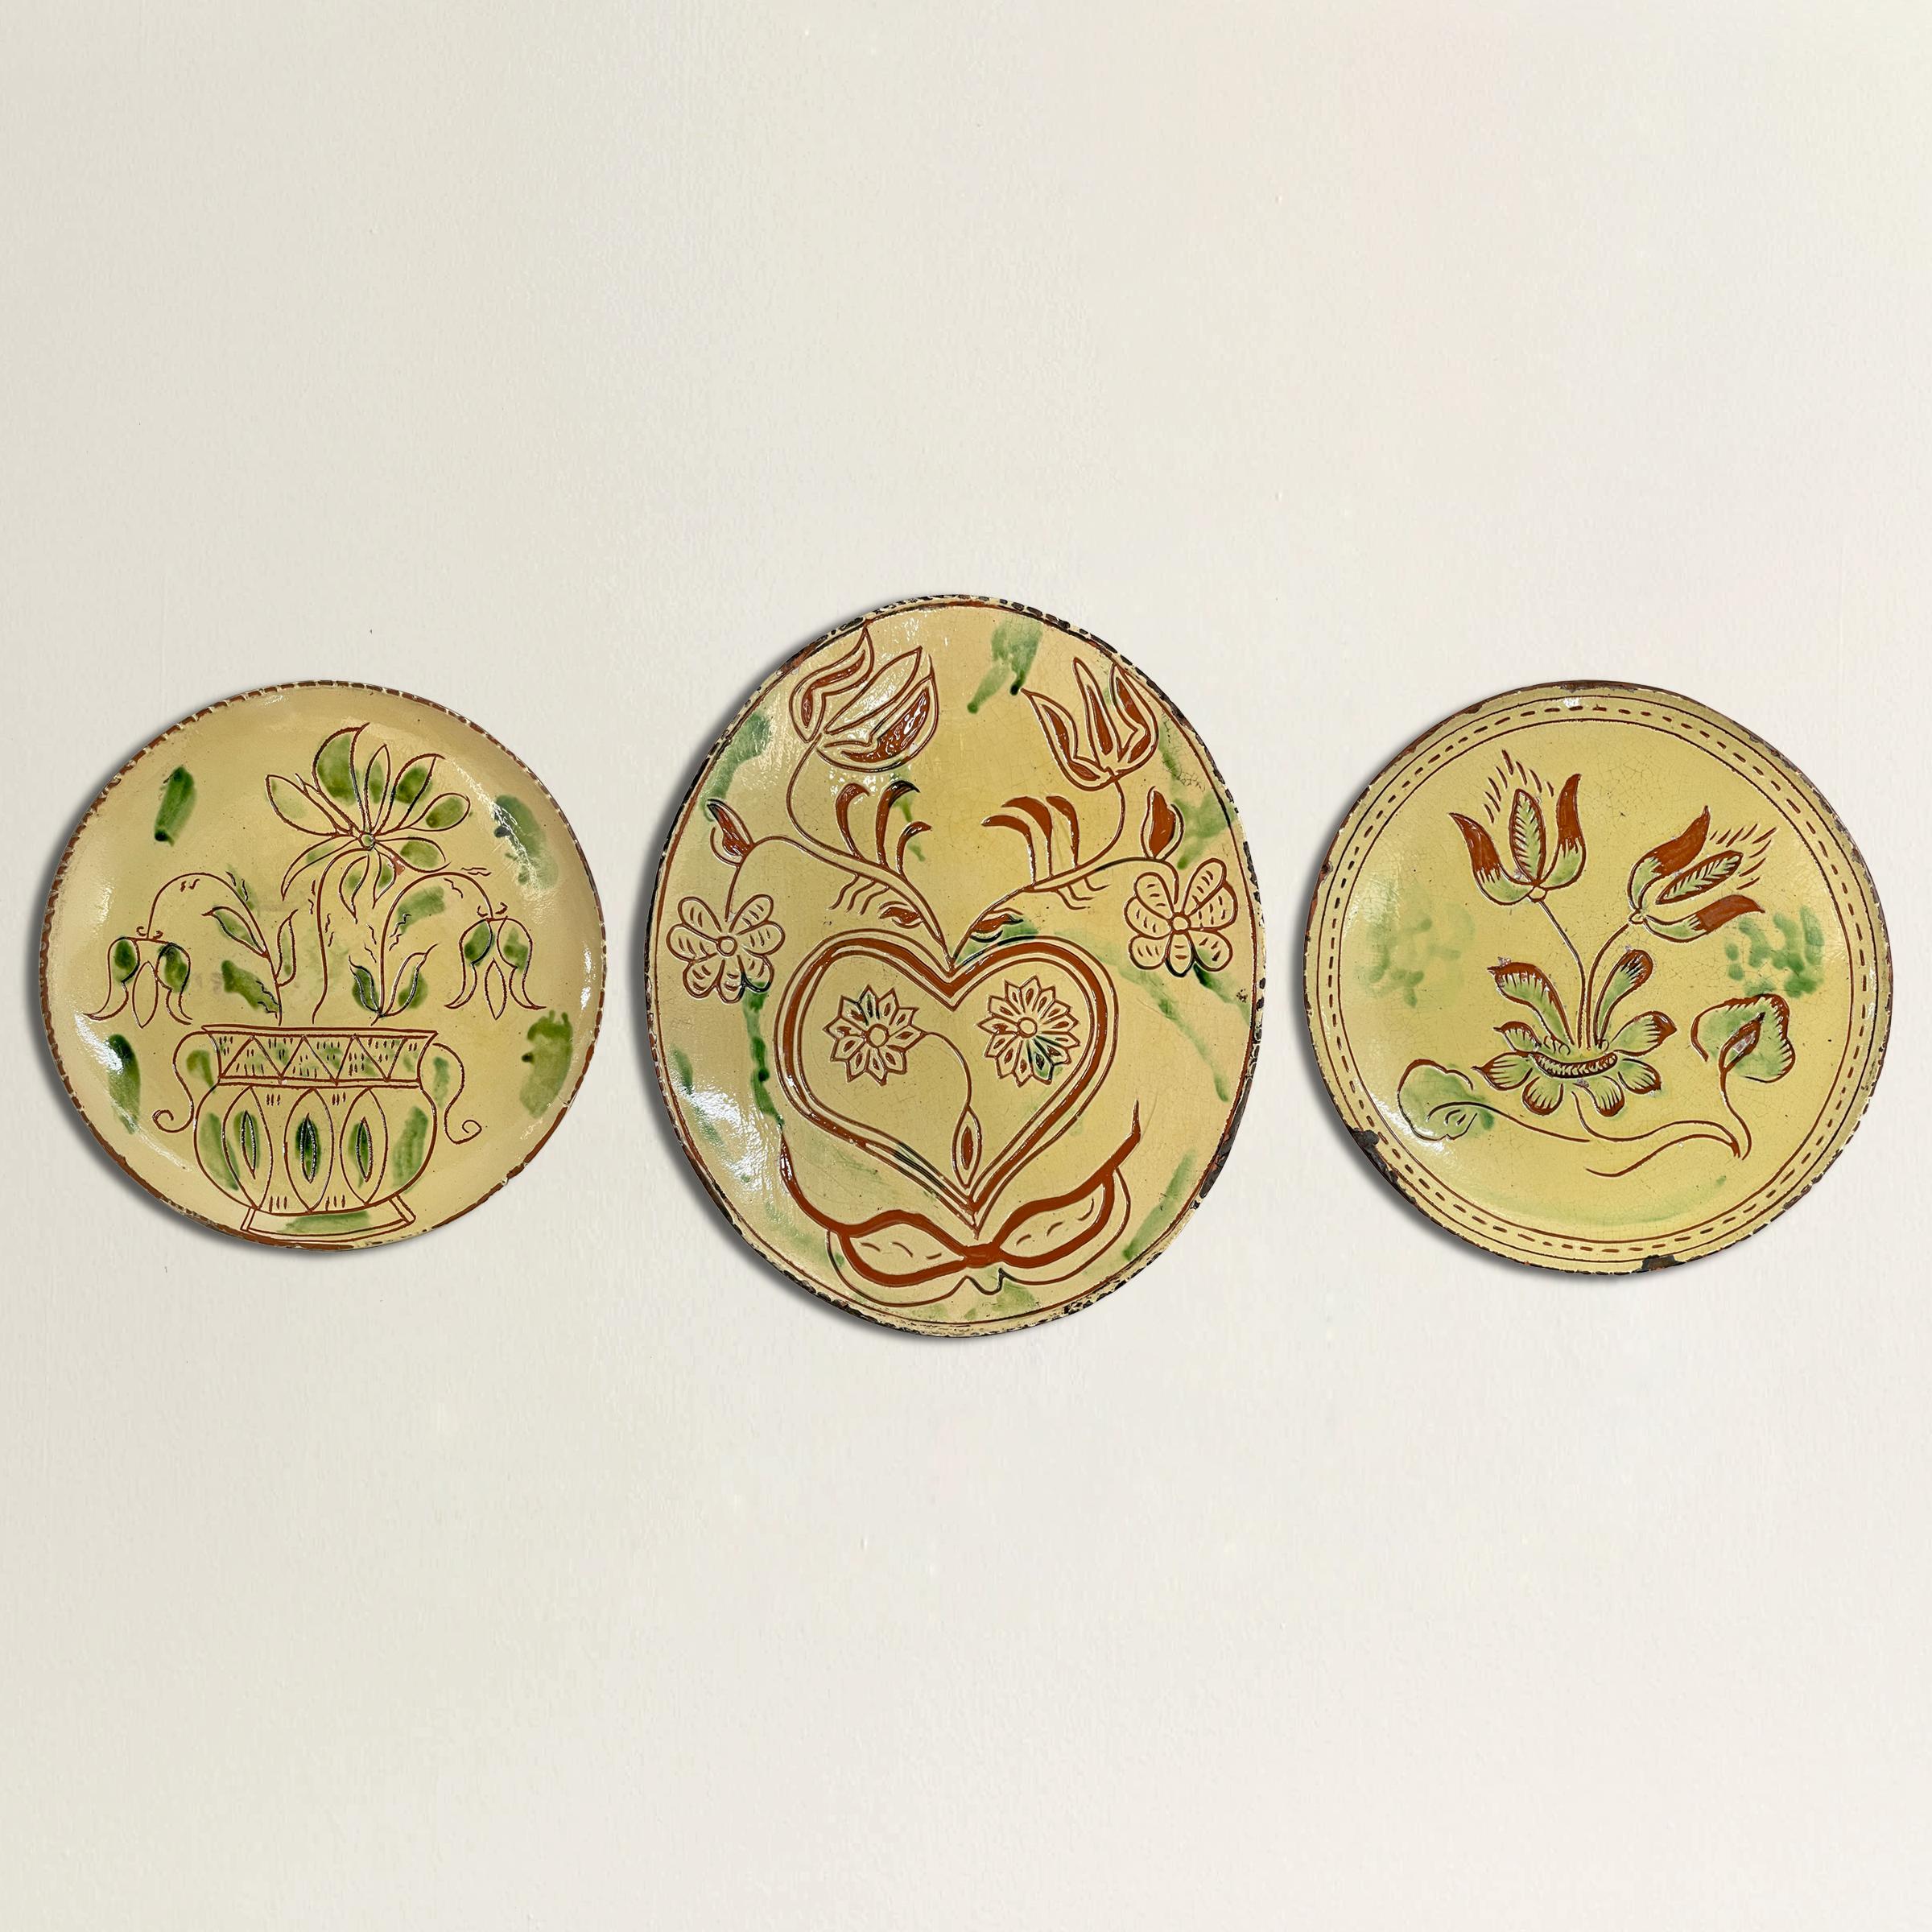 A charming set of three glazed redware pottery plate reproductions by the Turtlecreek Potters of Morrow, Ohio, each decorated with incised flowers and heats and glazed in yellow and green glazes. These pieces were created in the 1980s and 90s by